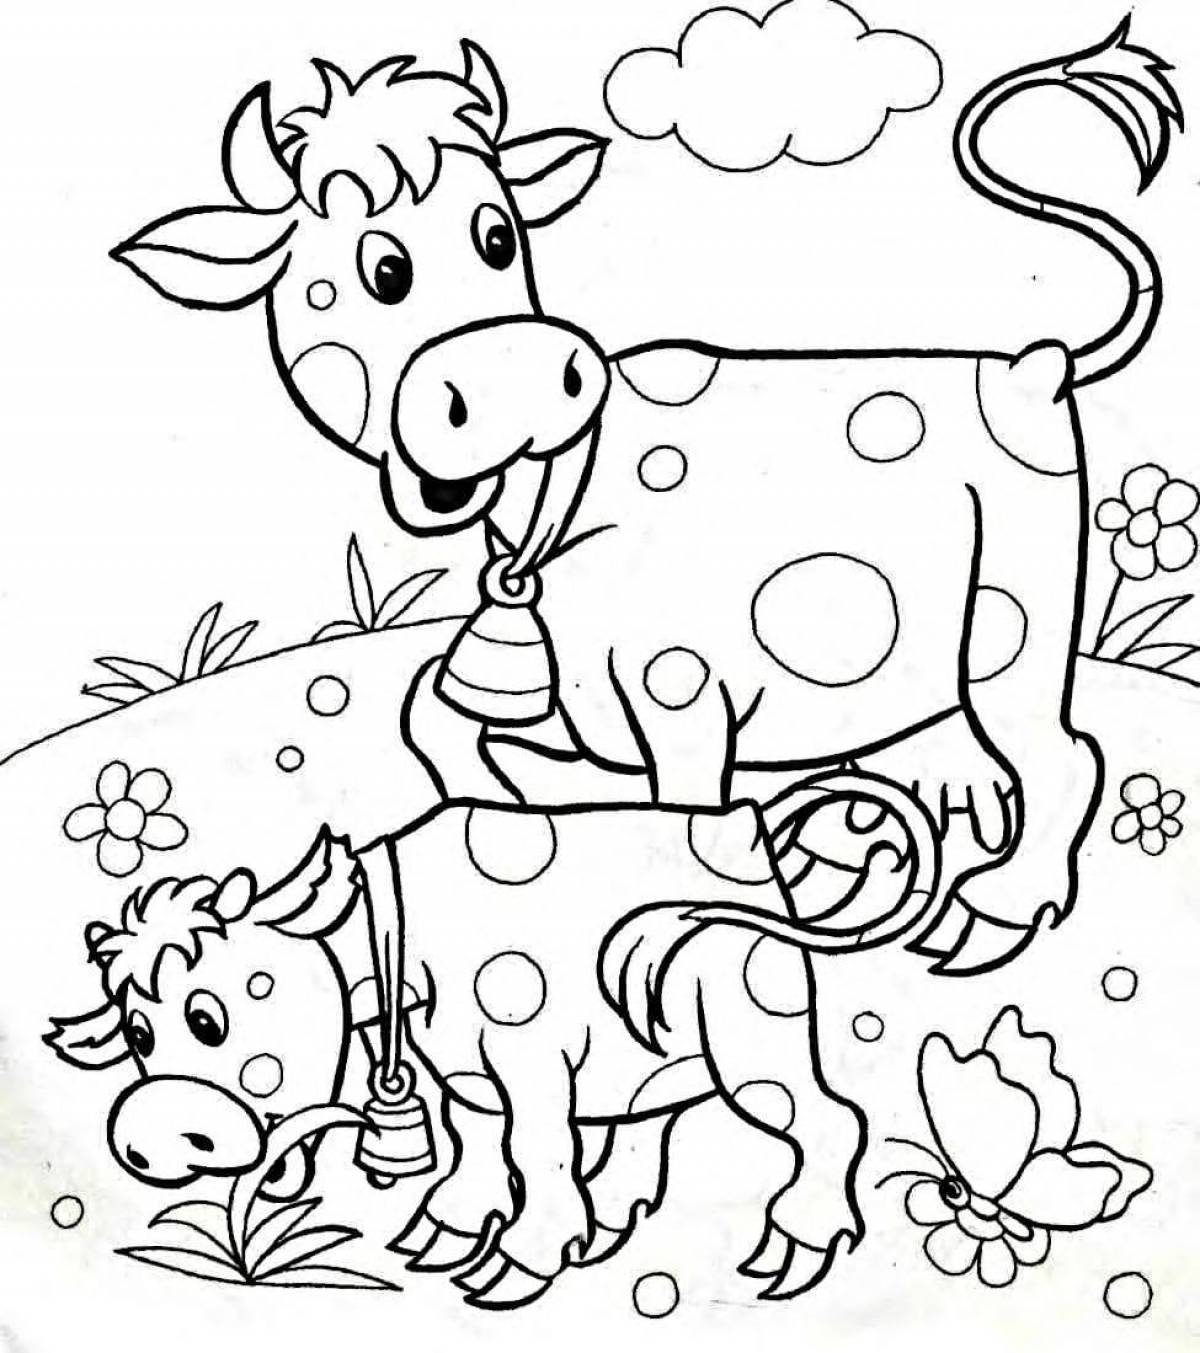 Fluffy coloring pages pets for children 5-7 years old